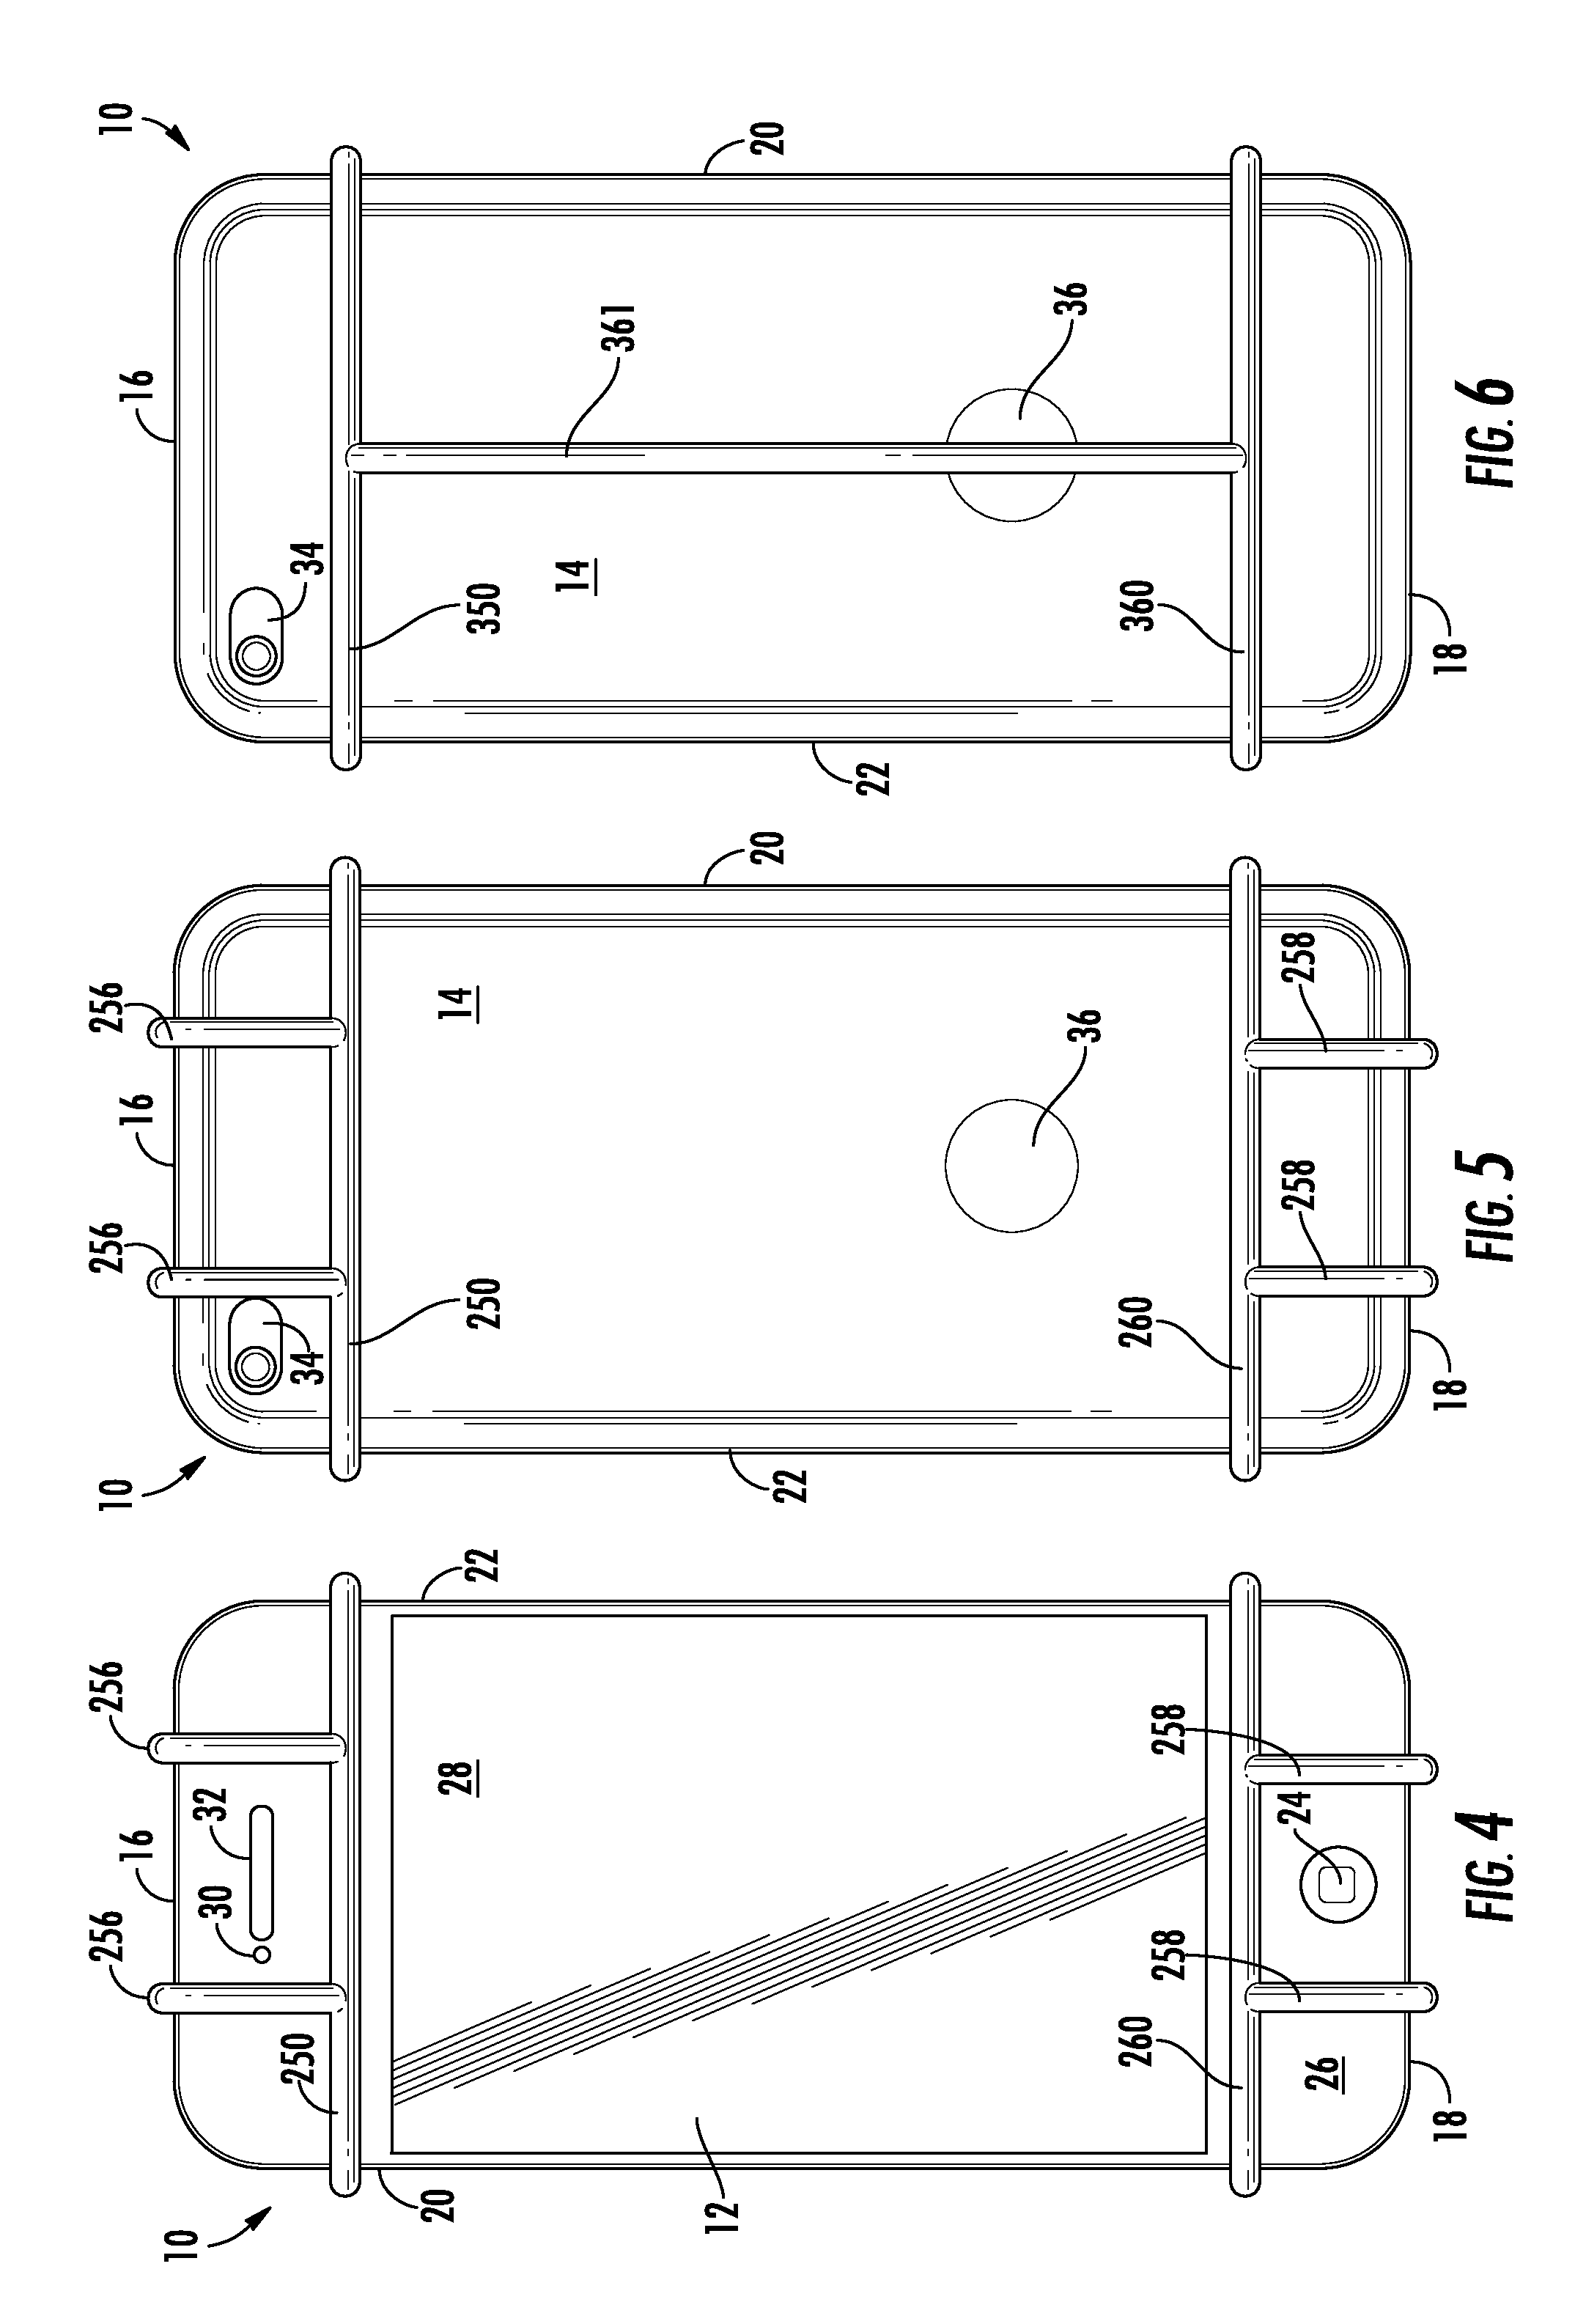 Apparatus and method for securing or protecting electronic devices